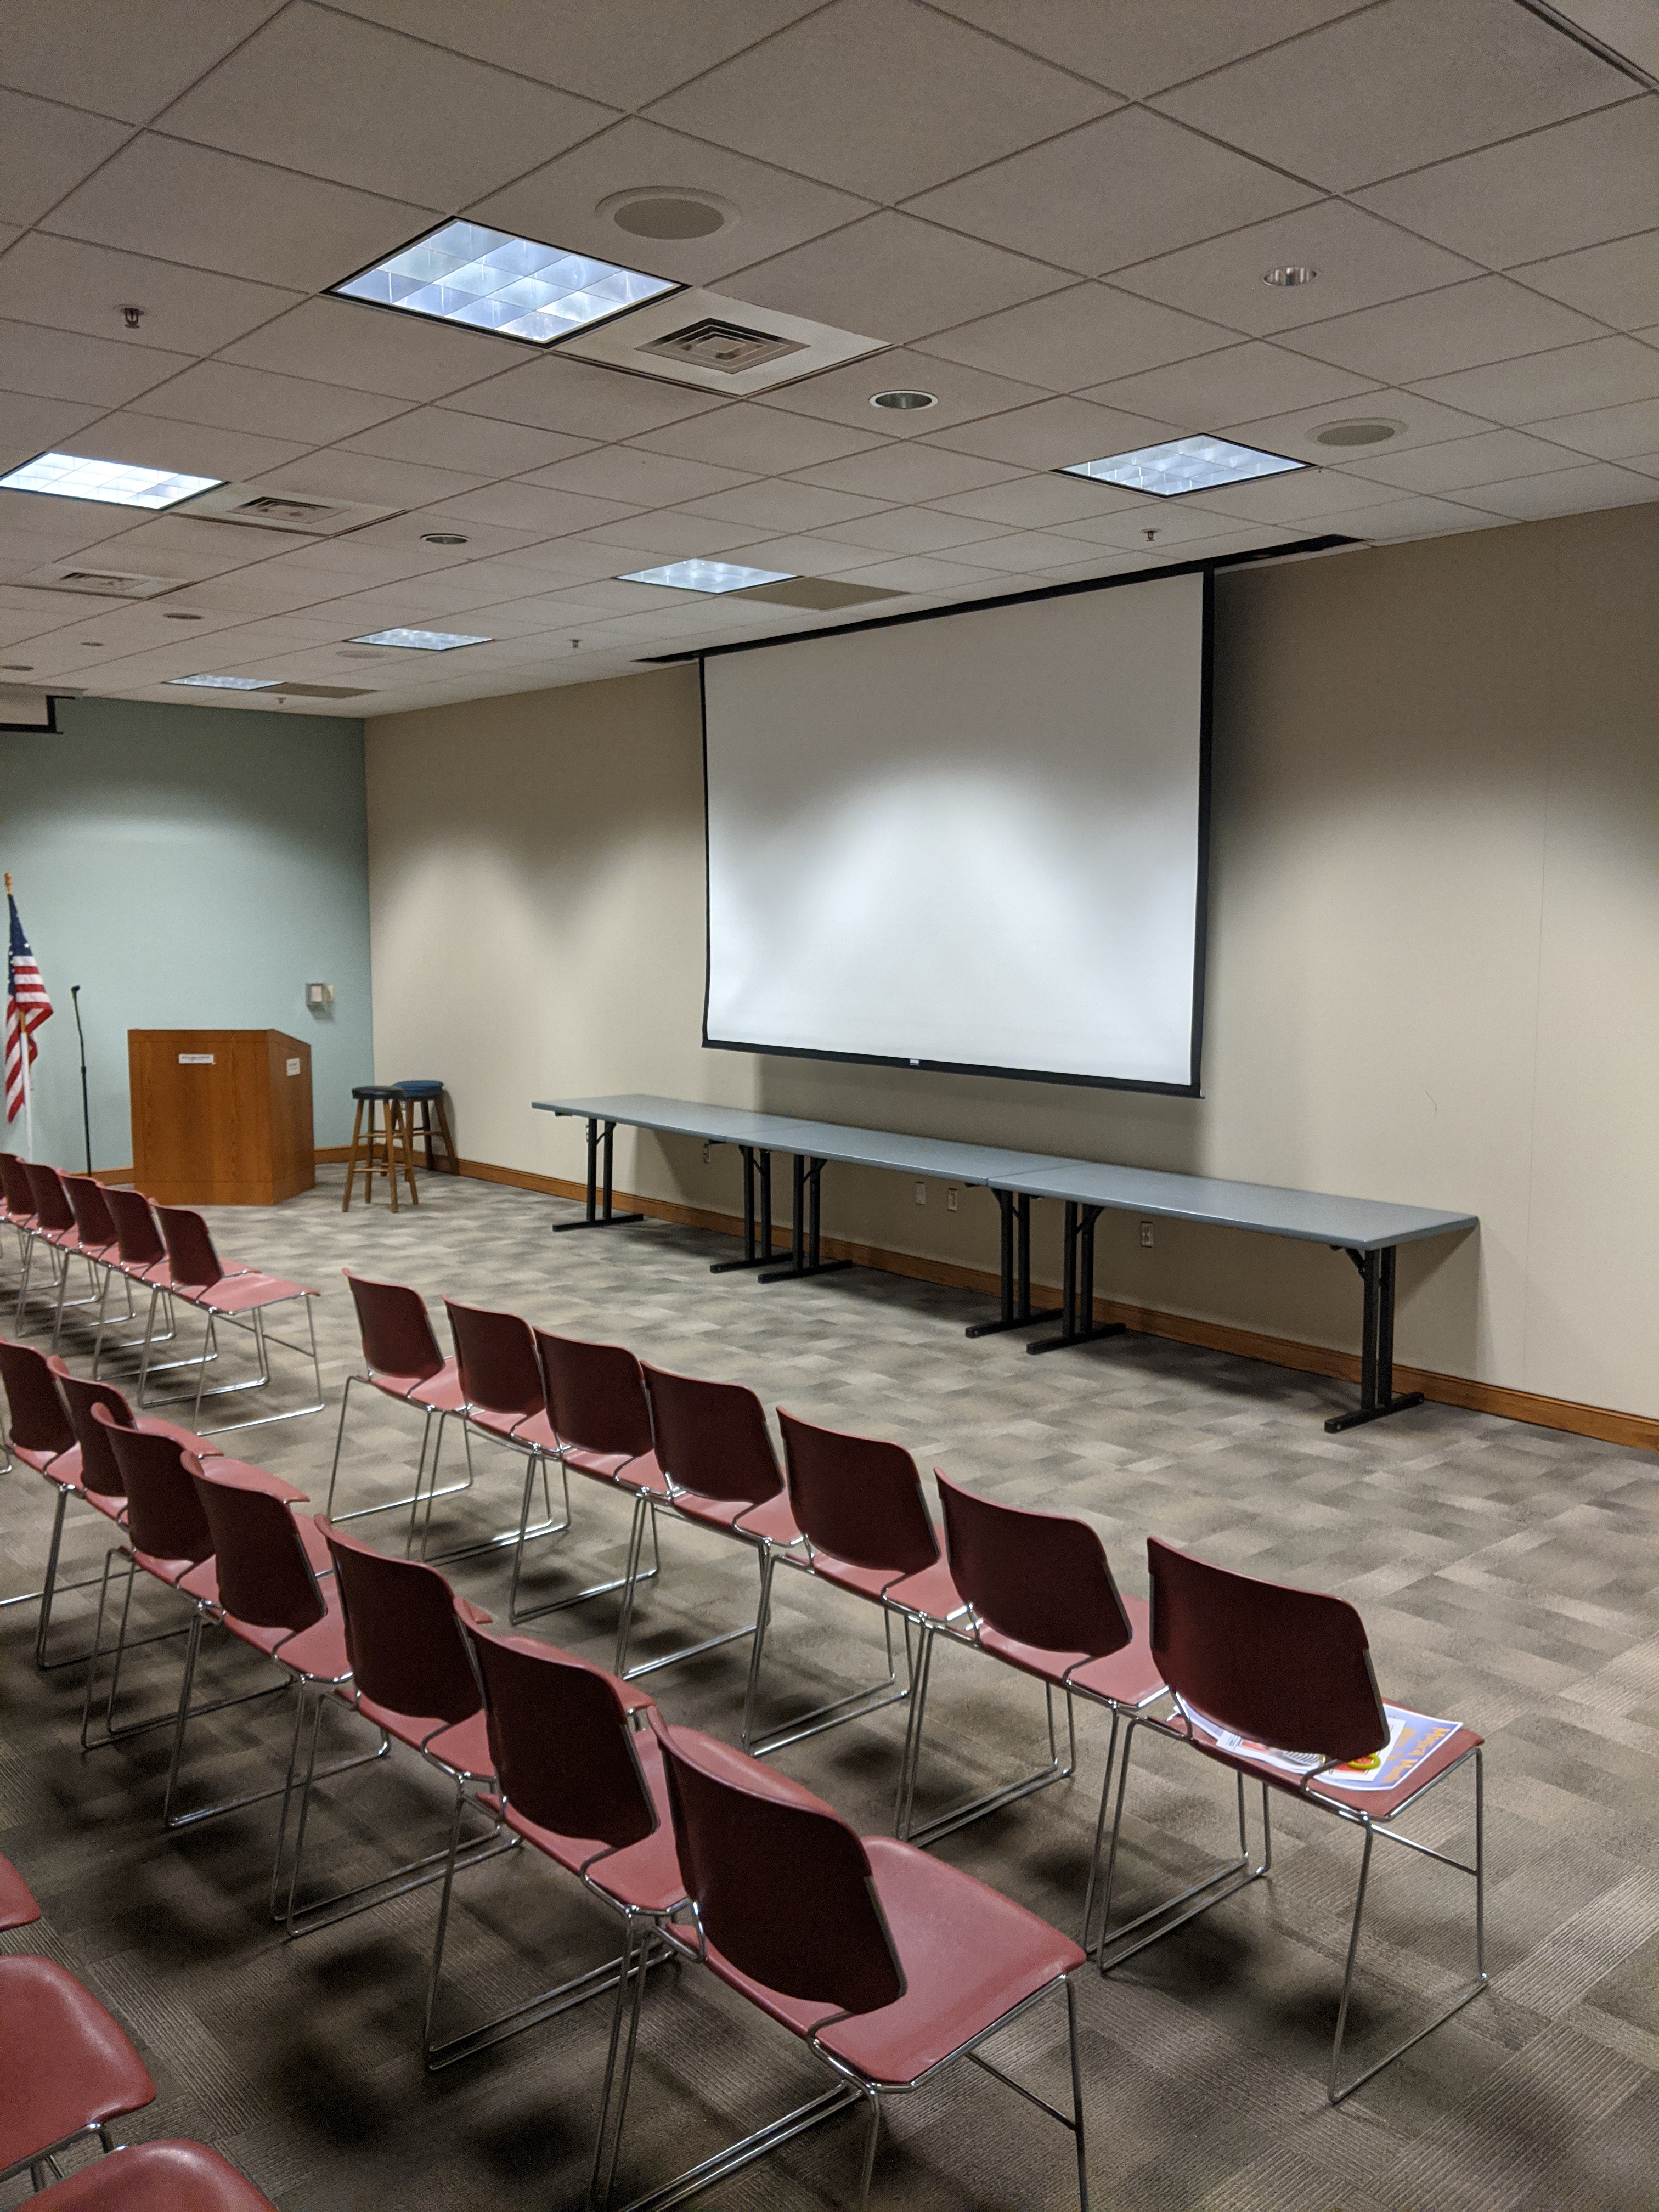 Room photo of Multipurpose Room C showing chairs placed in auditorium setup with projector screen pulled down at front